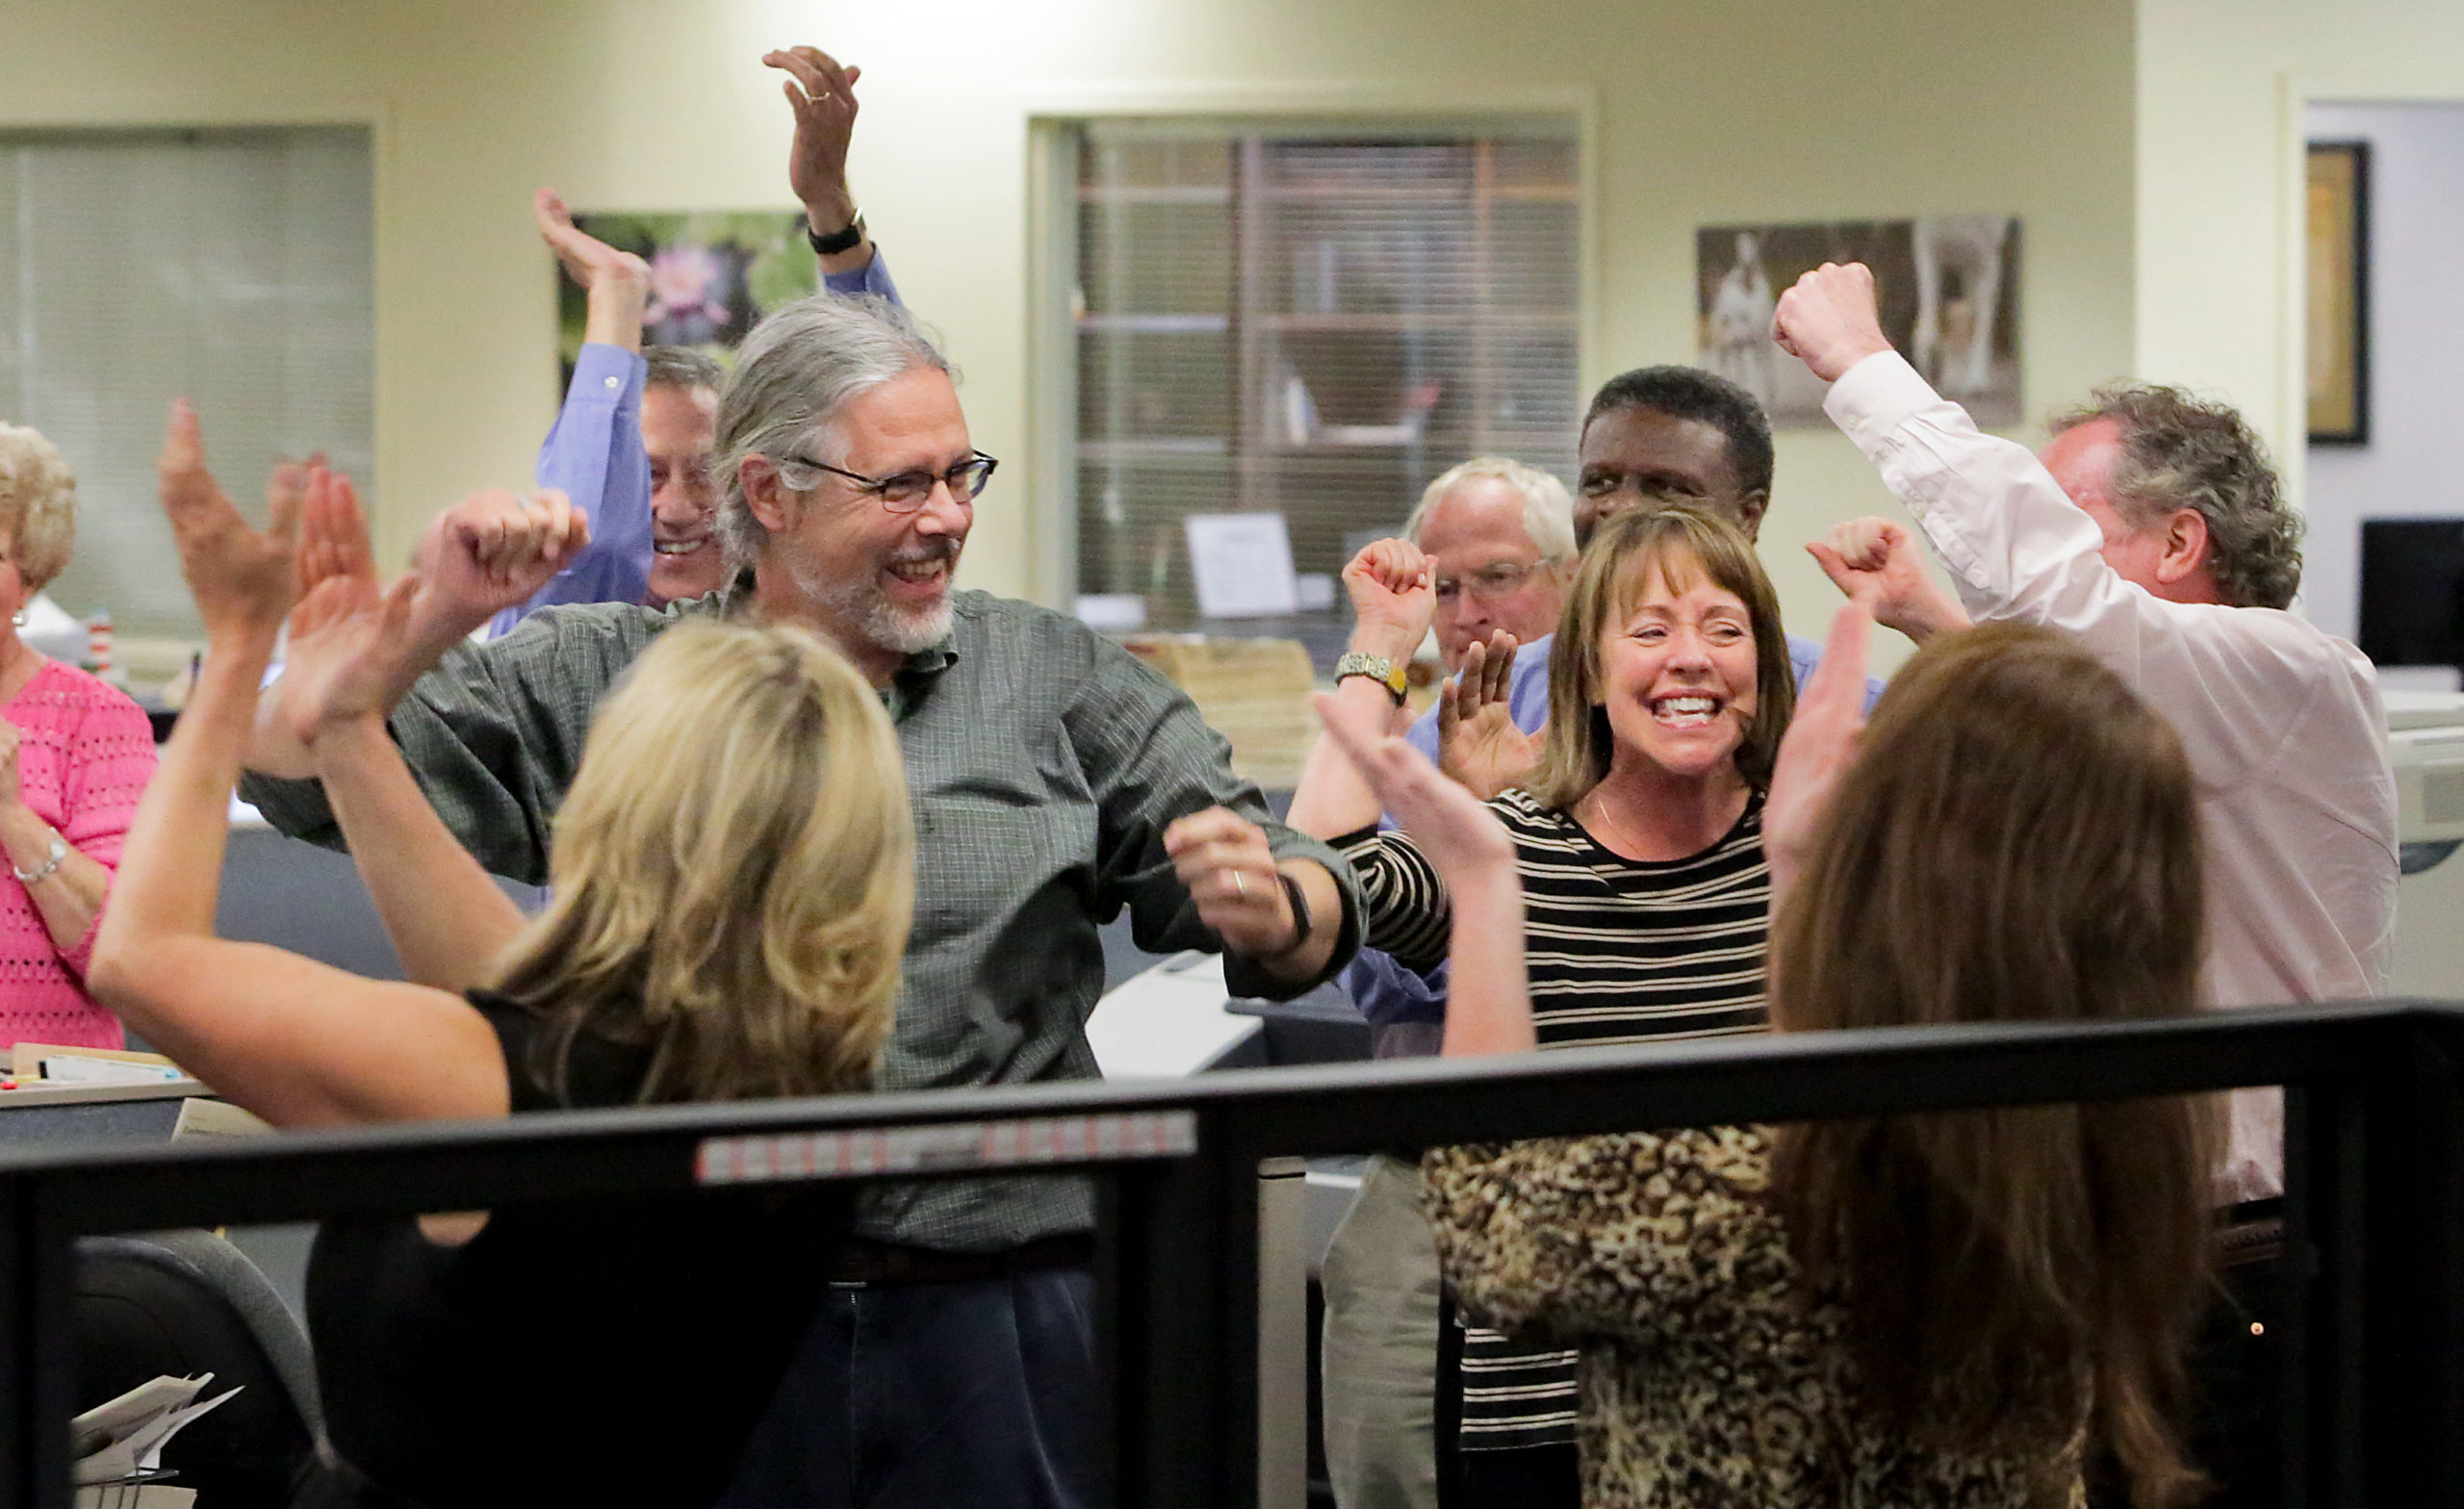 The Post and Courier staff cheers after the Pulitzer prize announcement, April 2015. Independent, civic-driven dailies, like The Post and Courier, show the life — and potential digital transformation — of many remaining formerly “print” operations